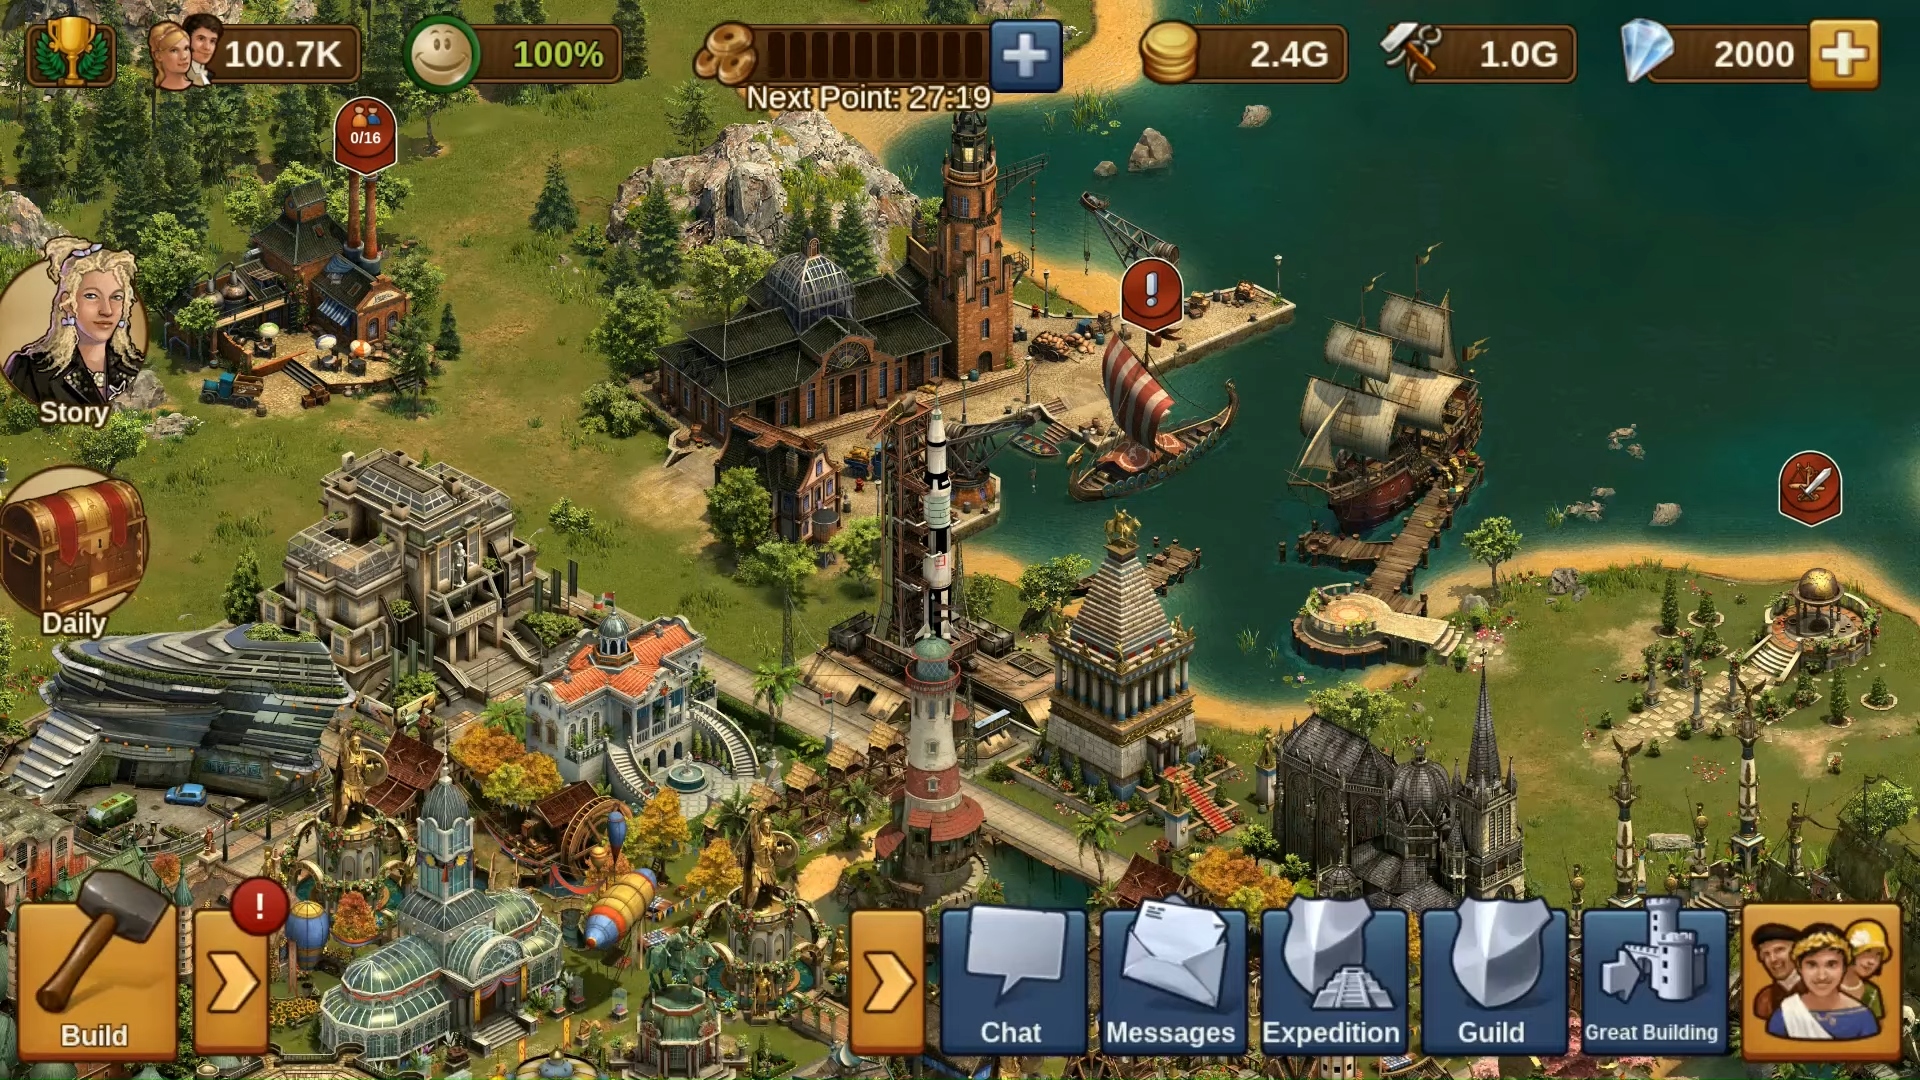 The best PC games on mobile